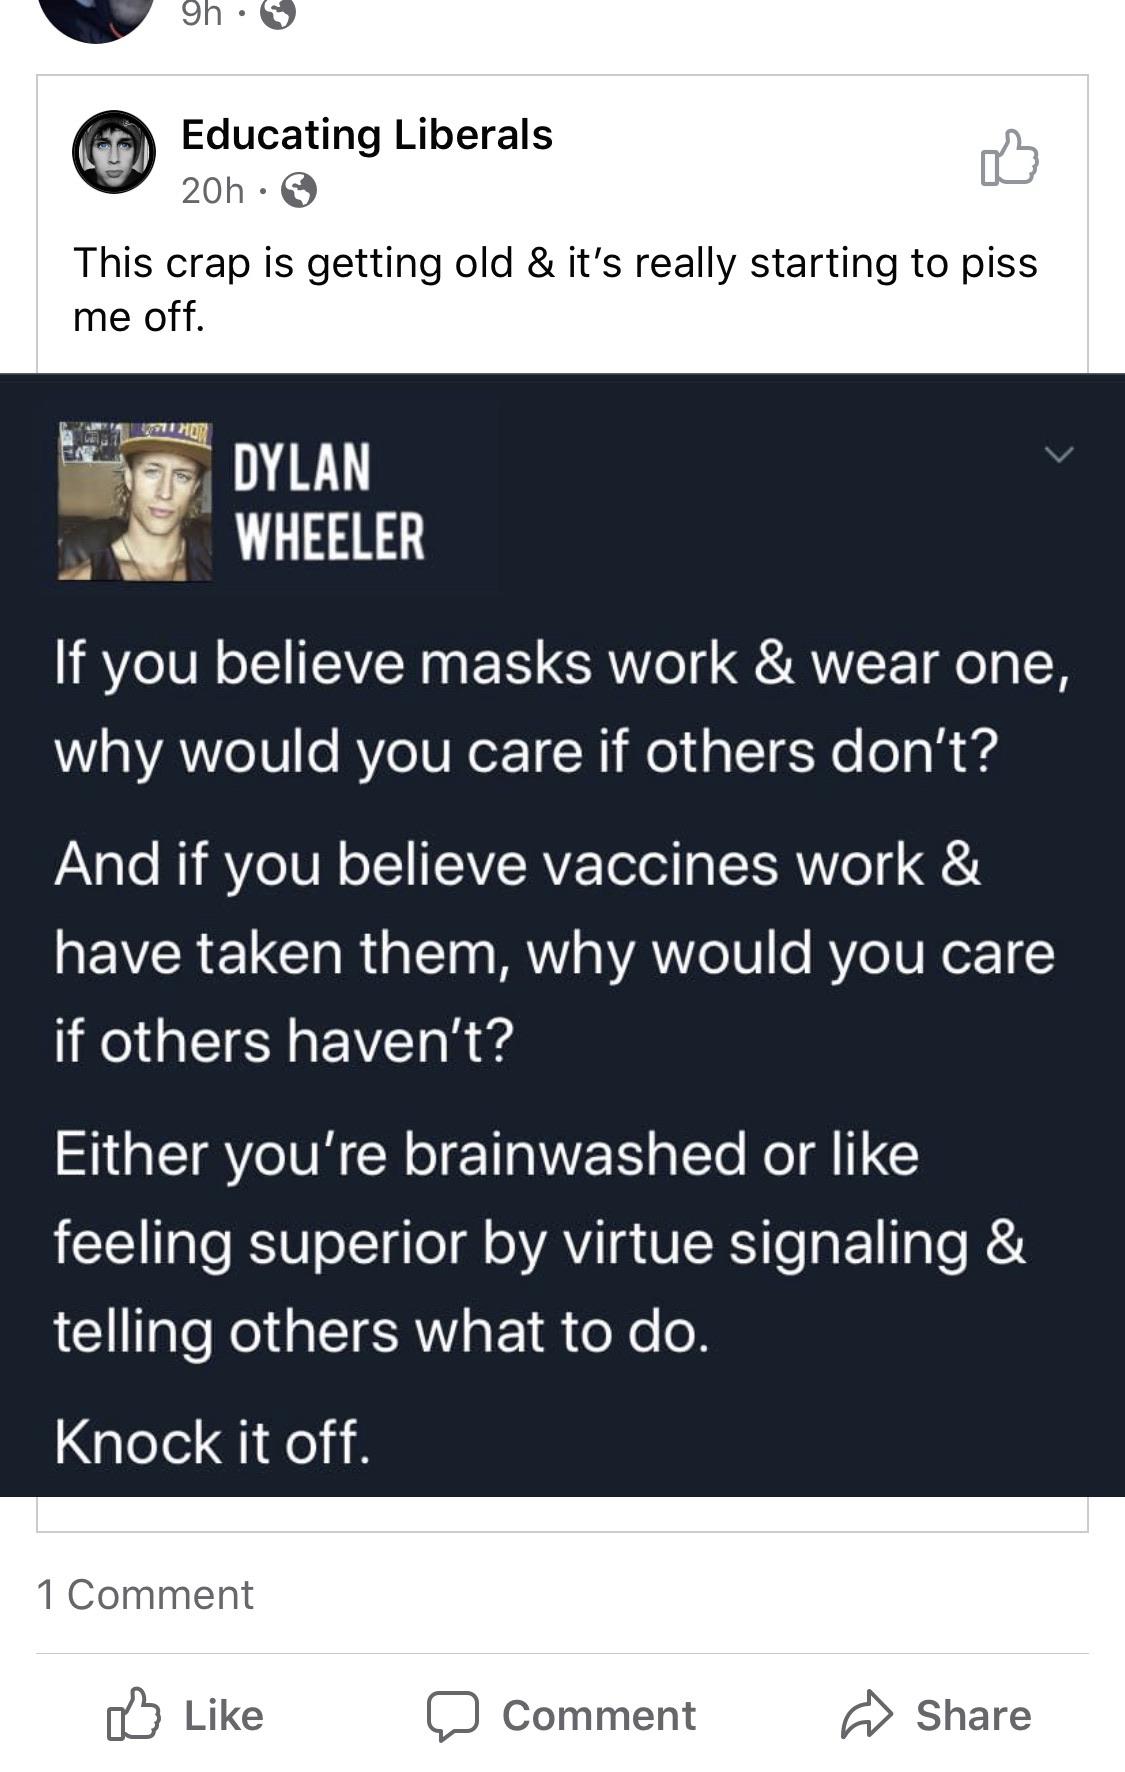 Political, GoFundMe, Seriously, RvWlB7, Masks, Knock boomer memes Political, GoFundMe, Seriously, RvWlB7, Masks, Knock text: Educating Liberals This crap is getting old & it's really starting to piss me off. DYLAN WHEELER If you believe masks work & wear one, why would you care if others don't? And if you believe vaccines work & have taken them, why would you care if others haven't? Either you're brainwashed or like feeling superior by virtue signaling & telling others what to do. Knock it off. 1 Comment Like Comment Share 